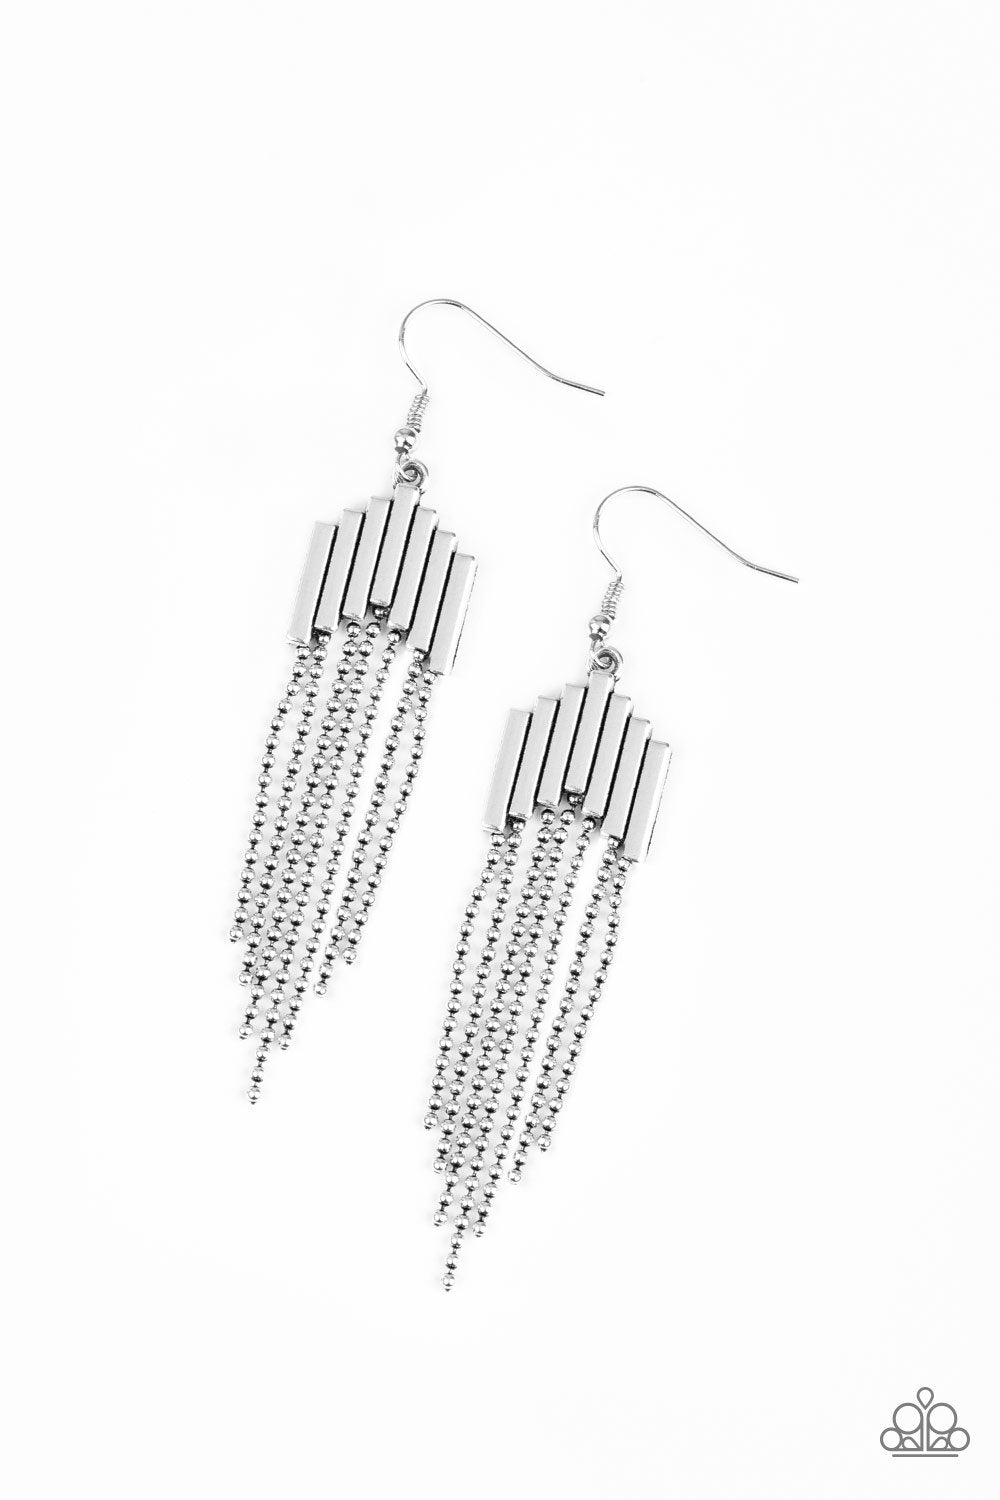 Radically Retro Silver Chain Earrings - Paparazzi Accessories-CarasShop.com - $5 Jewelry by Cara Jewels